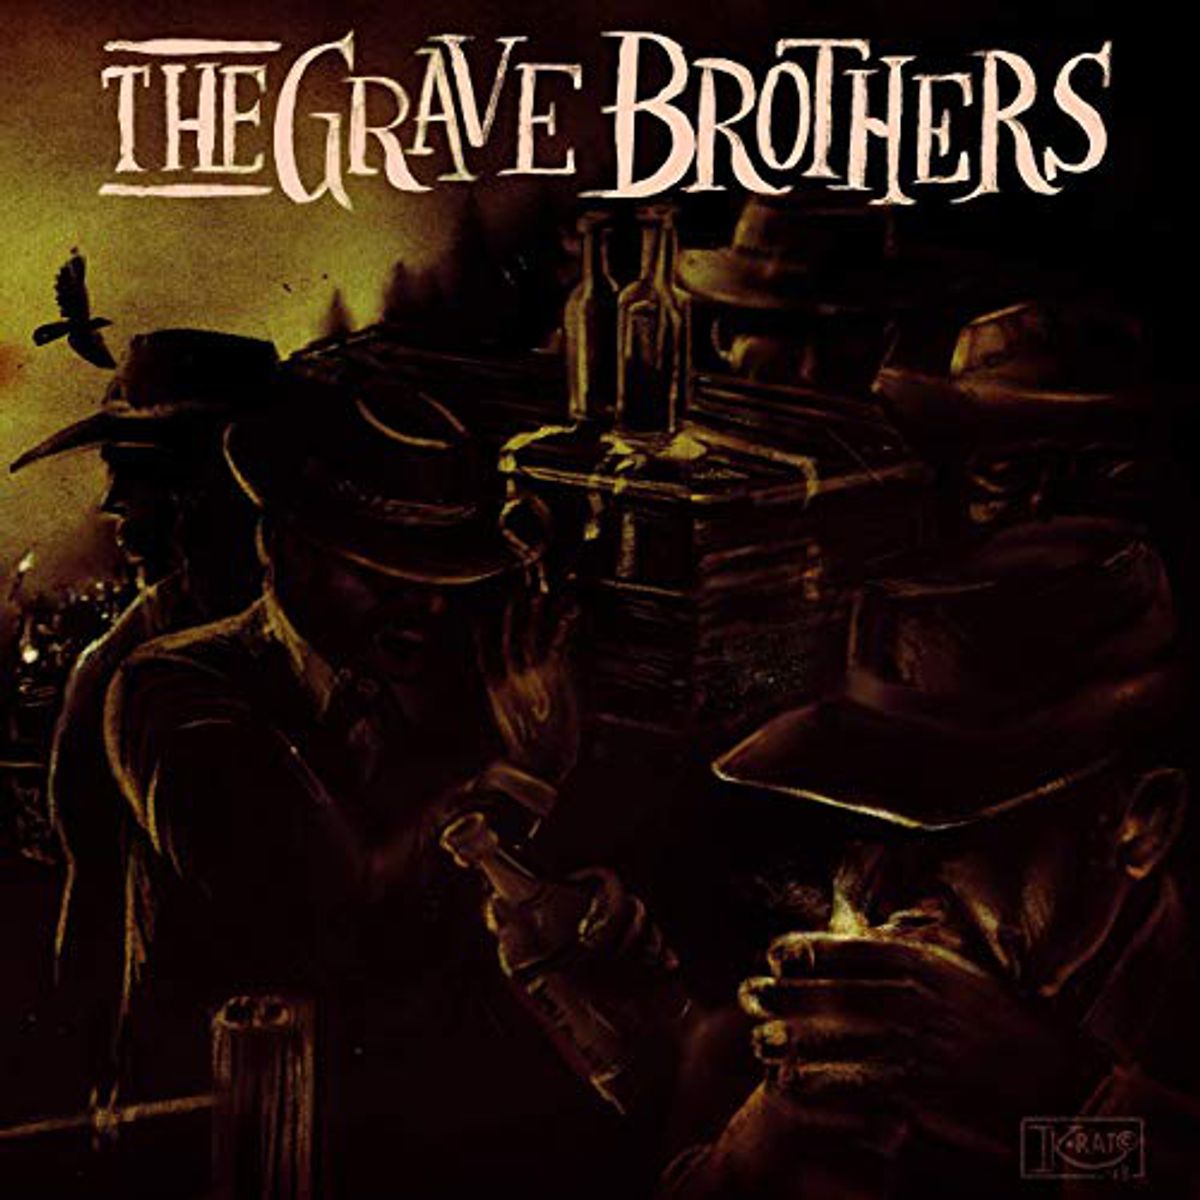 The Grave Brothers